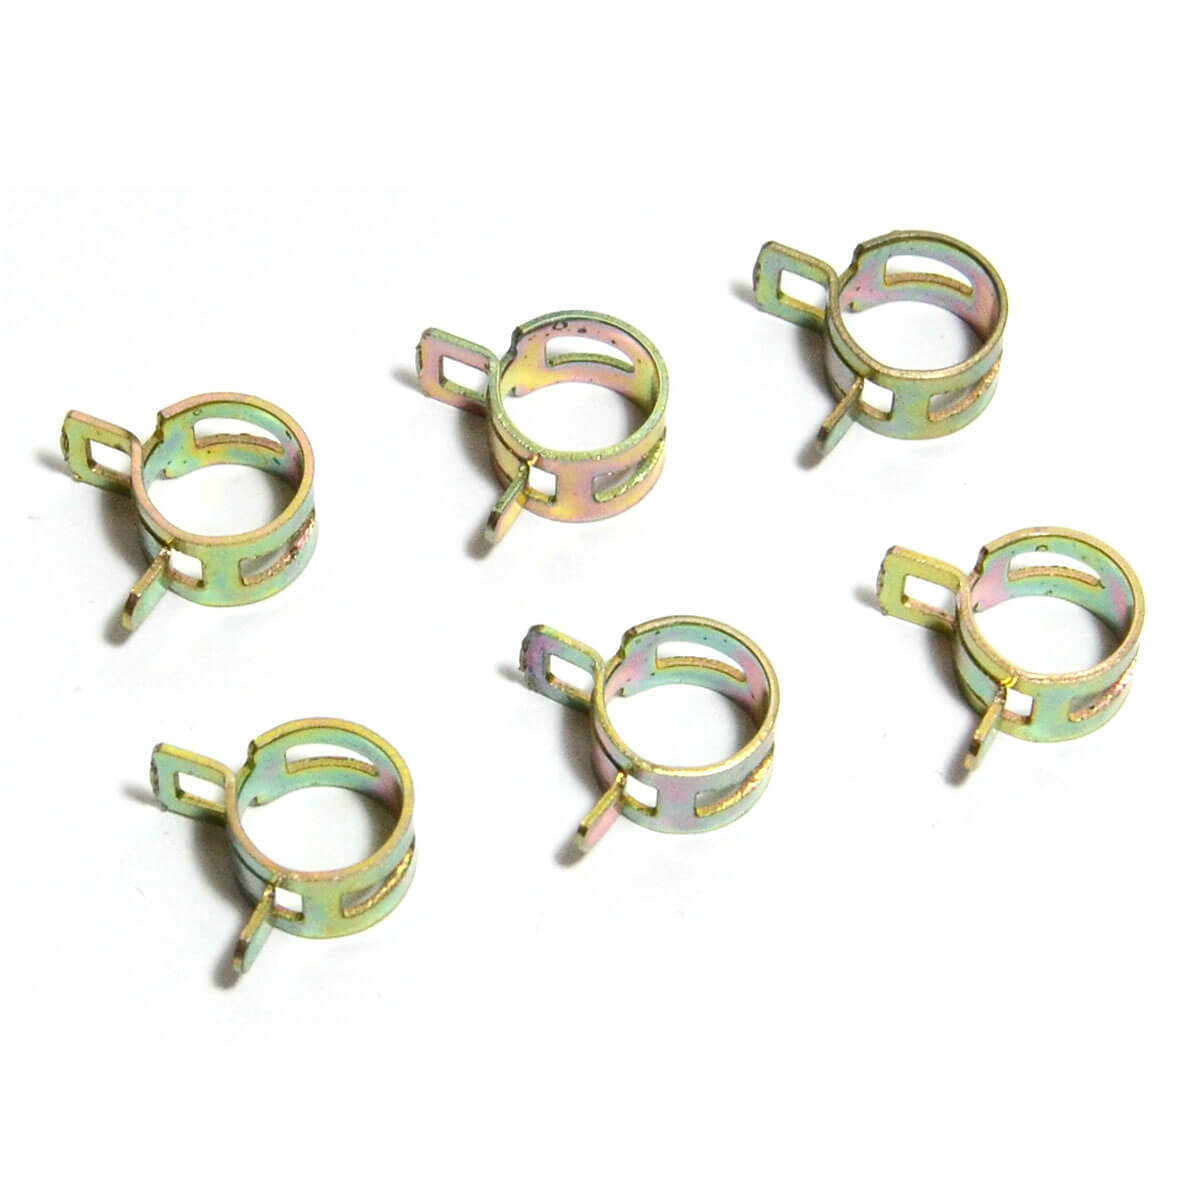 Hose Clamps Spring Size 6 these suit 6mm (1/4") hose Pack of 6